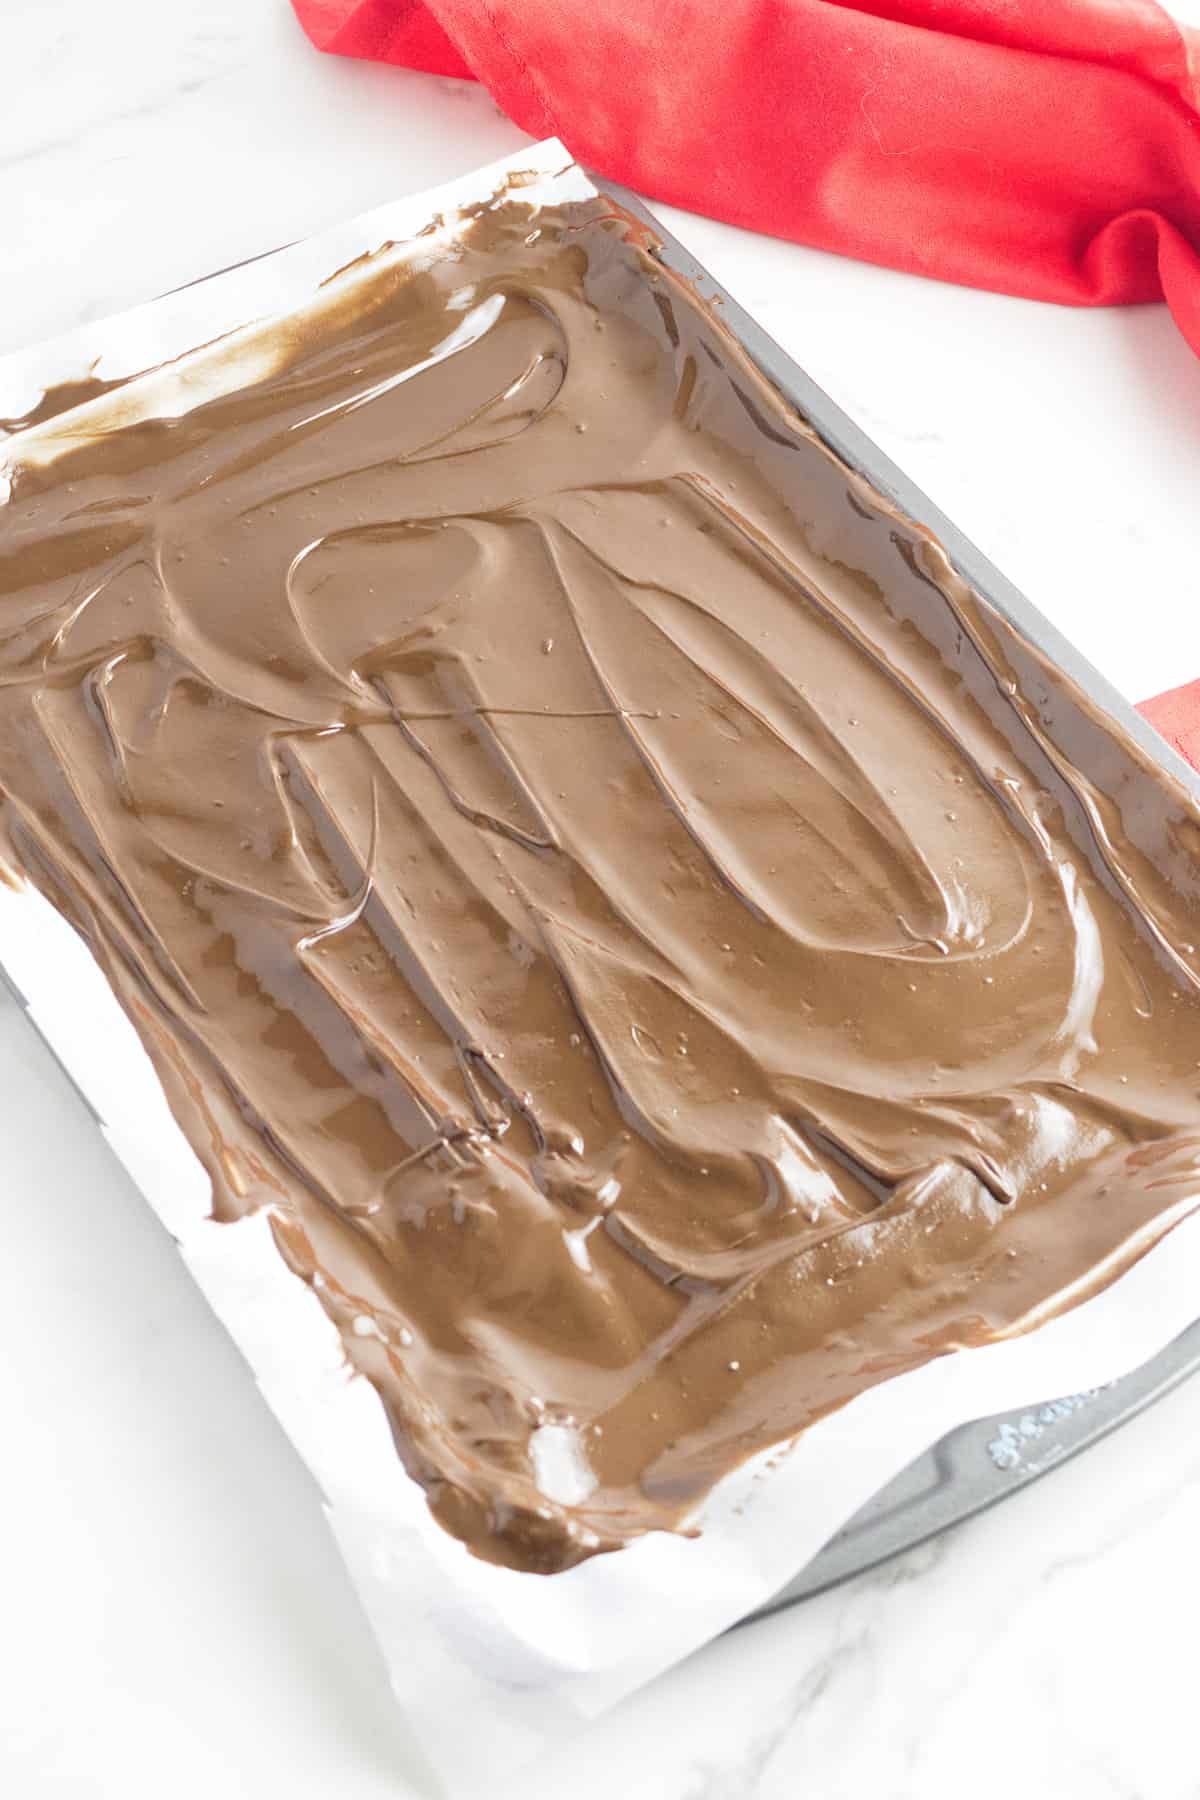 milk chocolate spread out on a cookie sheet.